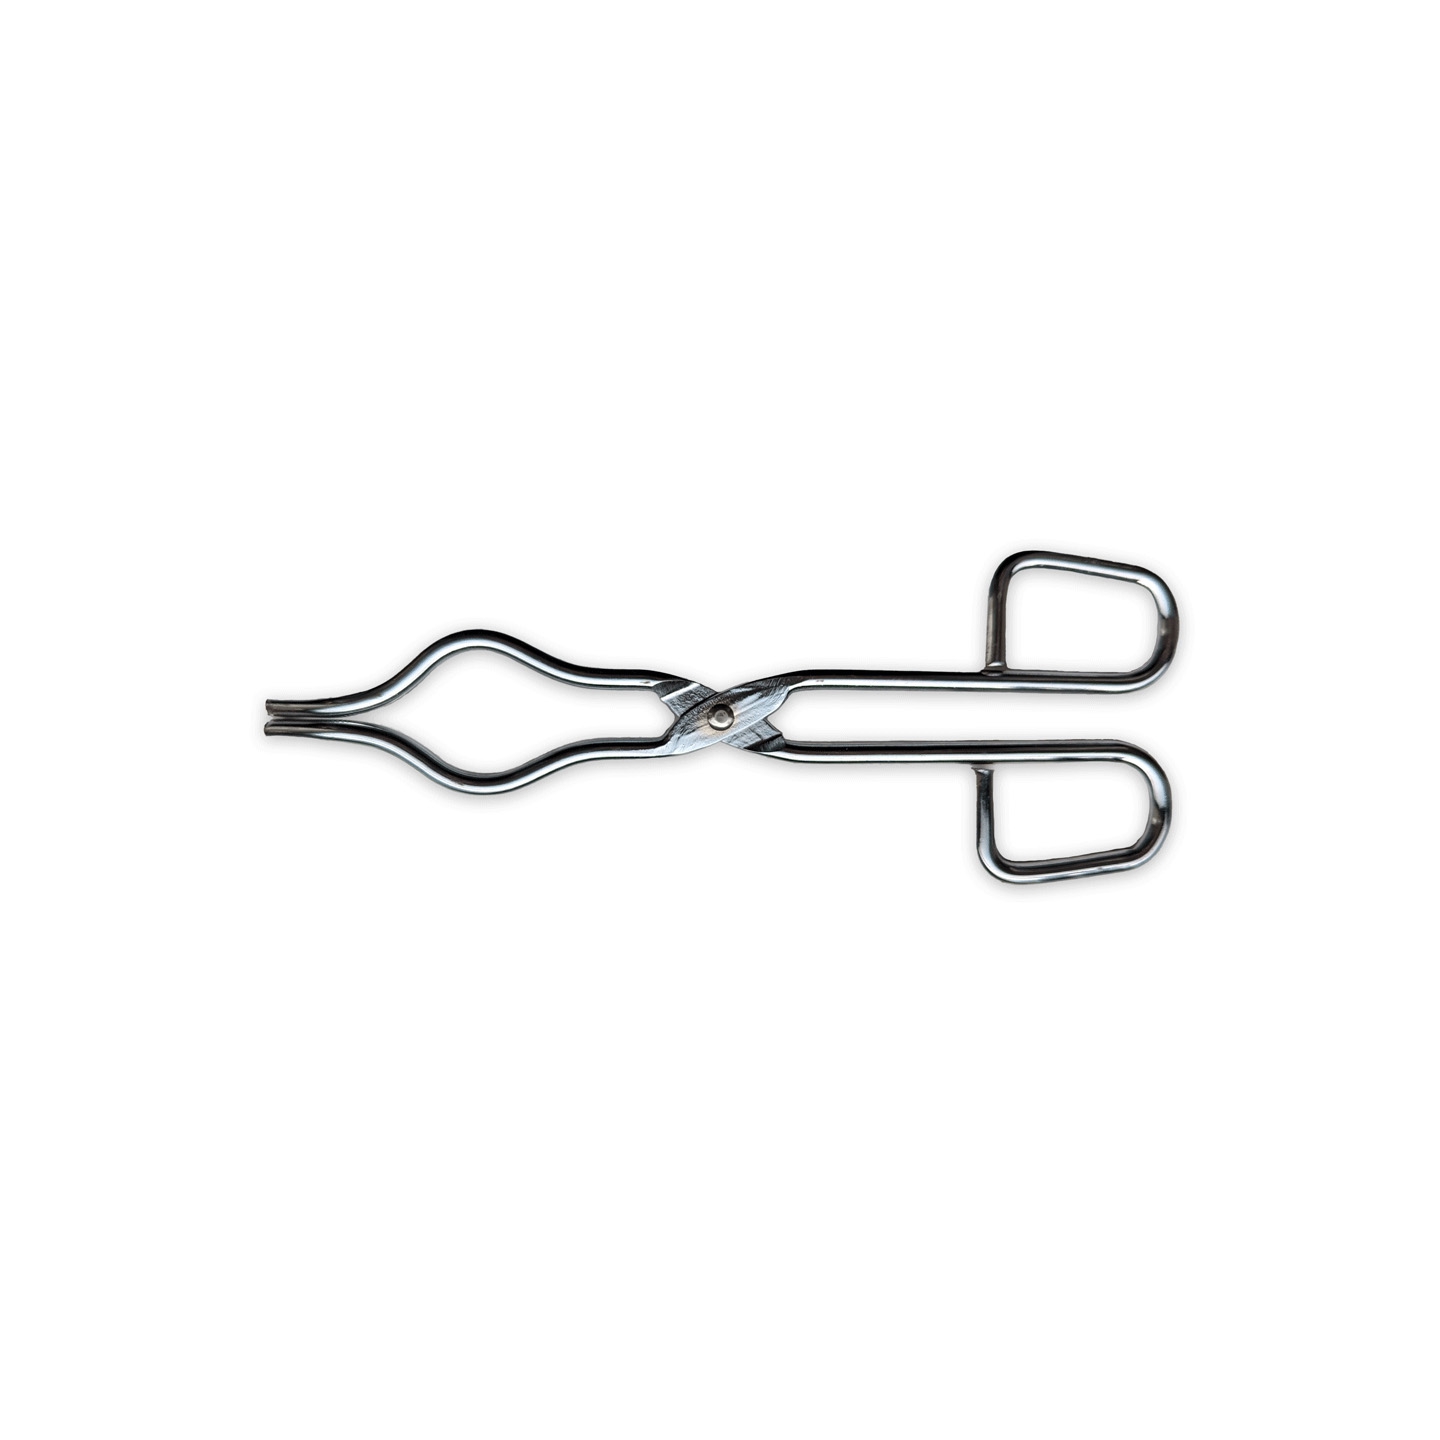 Crucible Tong, Stainless Steel, Length 150mm, Bow Curved Tips, Flat Hinge